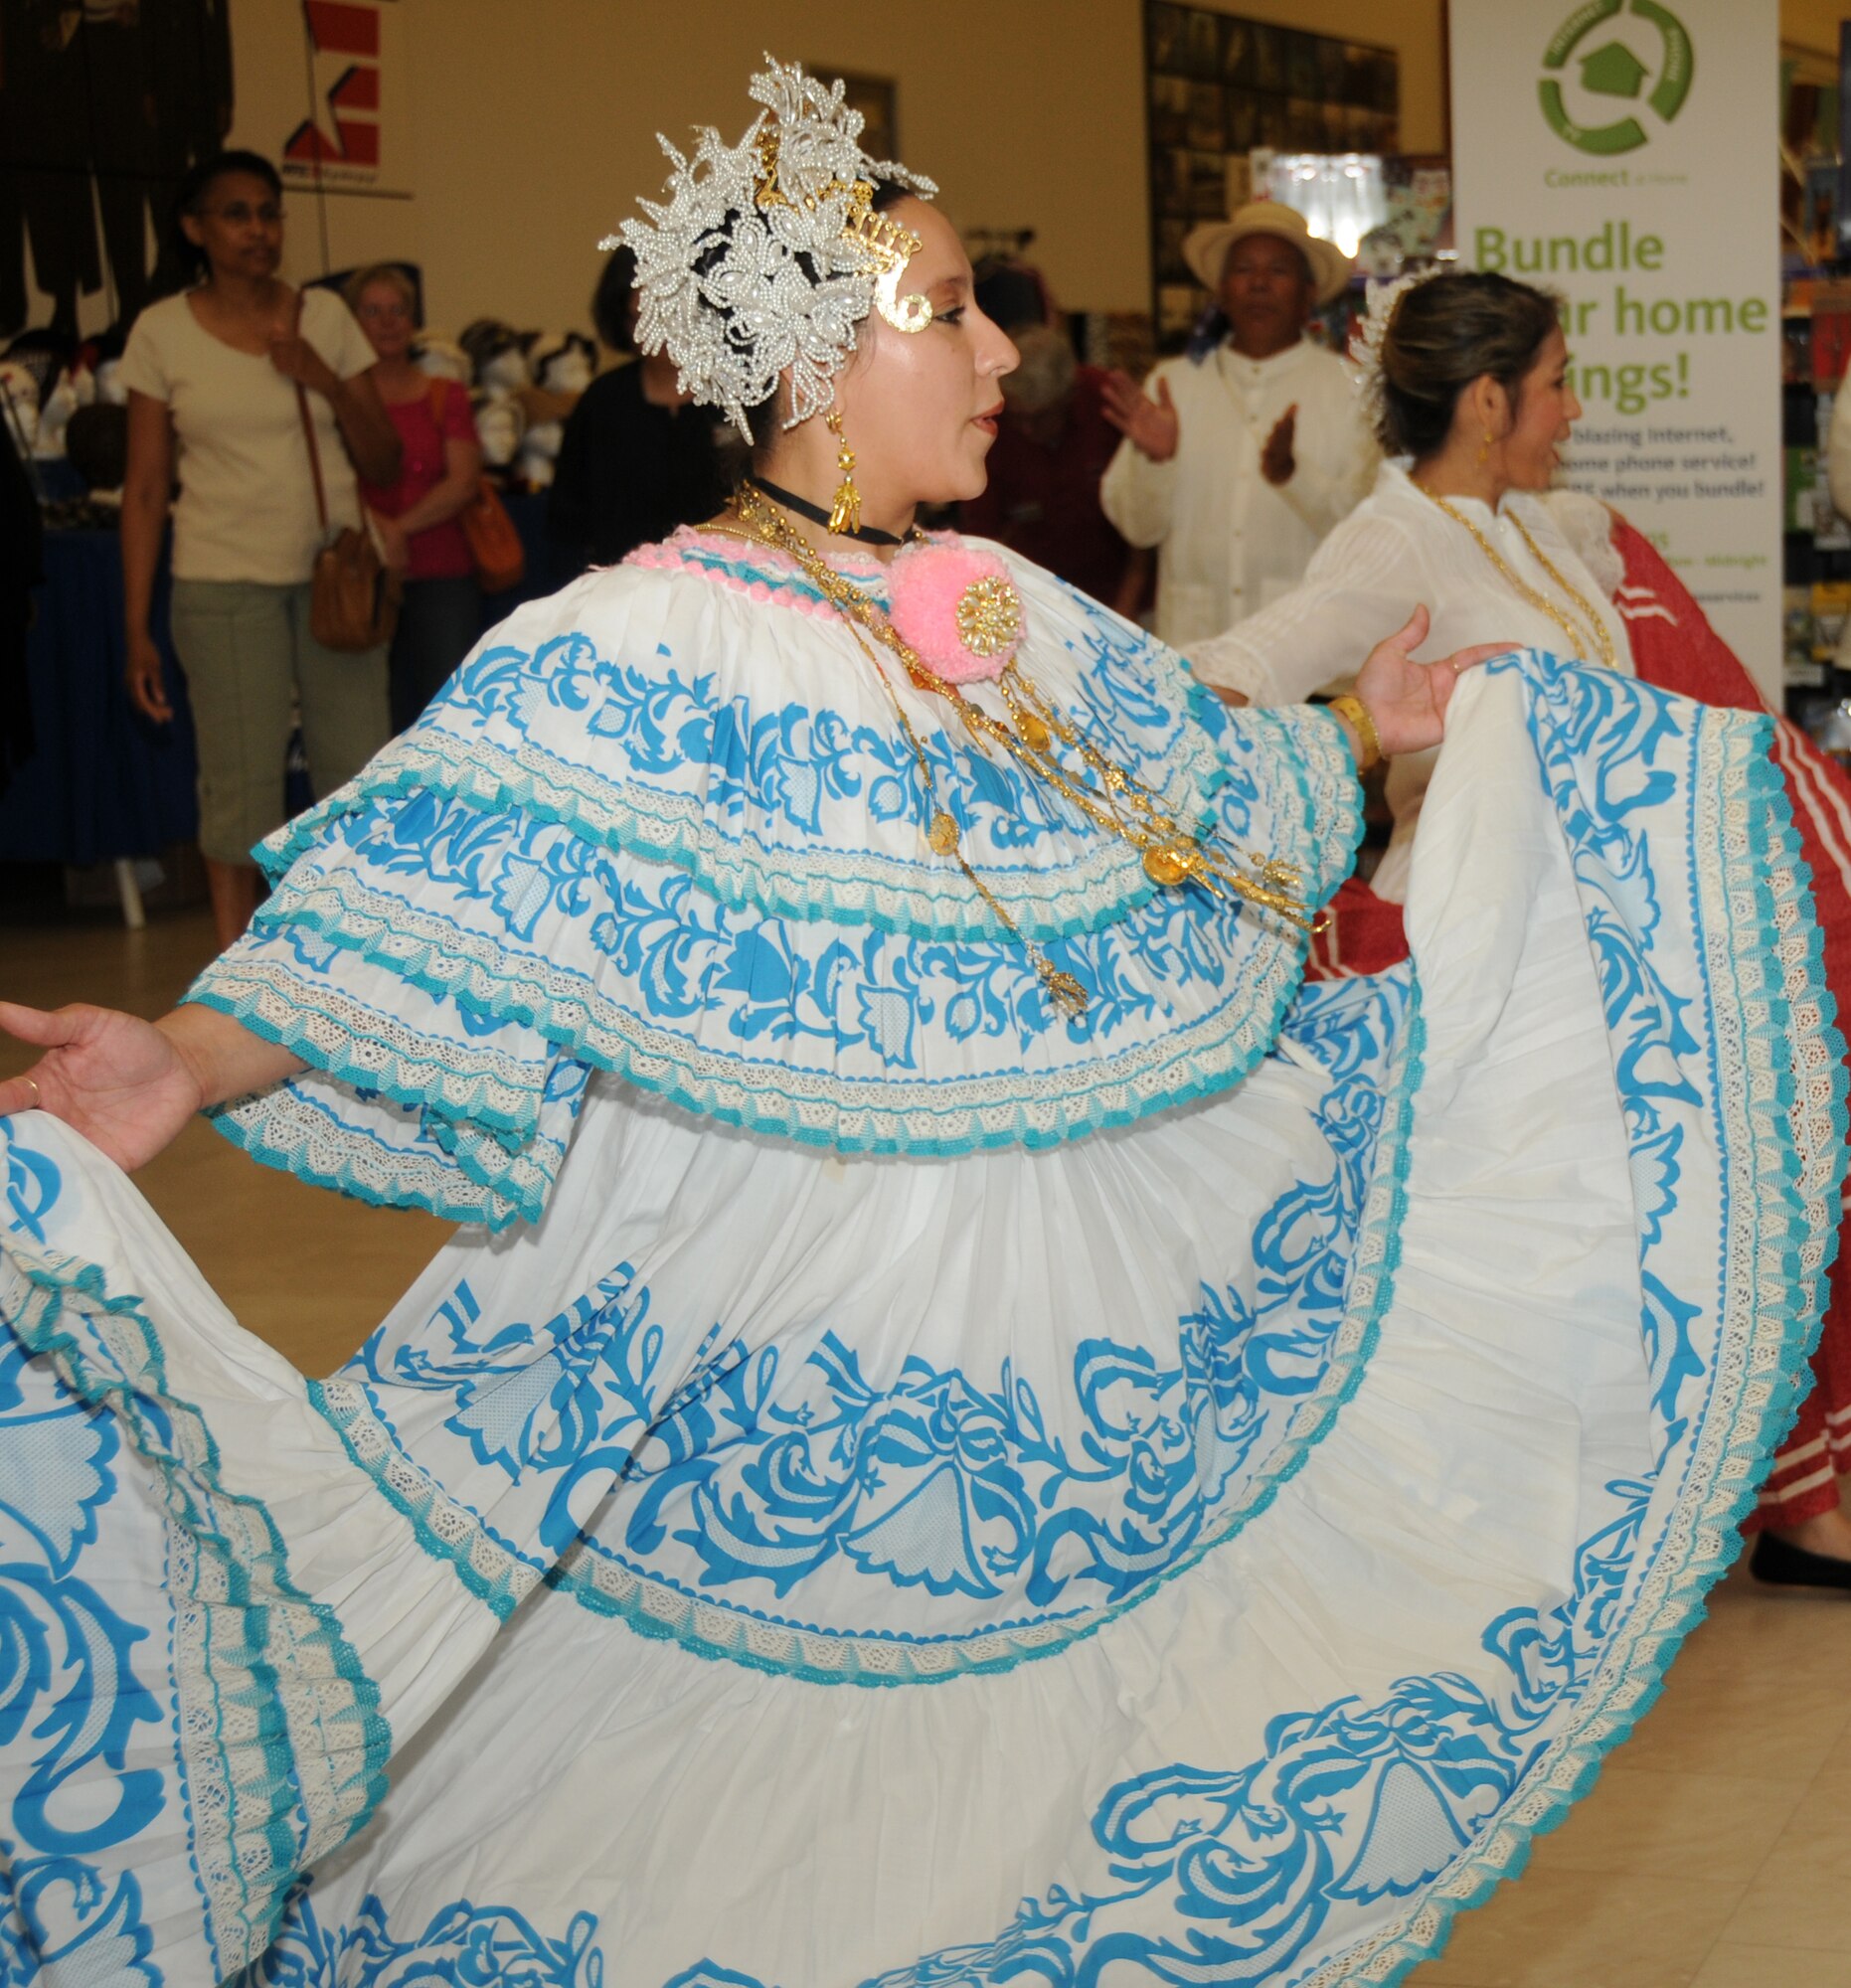 Elisa Ortegon performs with the Panama Without Borders Folkloric Dance Group from Biloxi Oct. 8 during the Hispanic Heritage Month celebration at the main exchange, Keesler Air Force Base, Miss.  Ortegon's husband is Navy retiree Caesar Ortegon.  The group performed 12 dances attired in traditional Panamanian costumes.  (U.S. Air Force photo by Kemberly Groue)